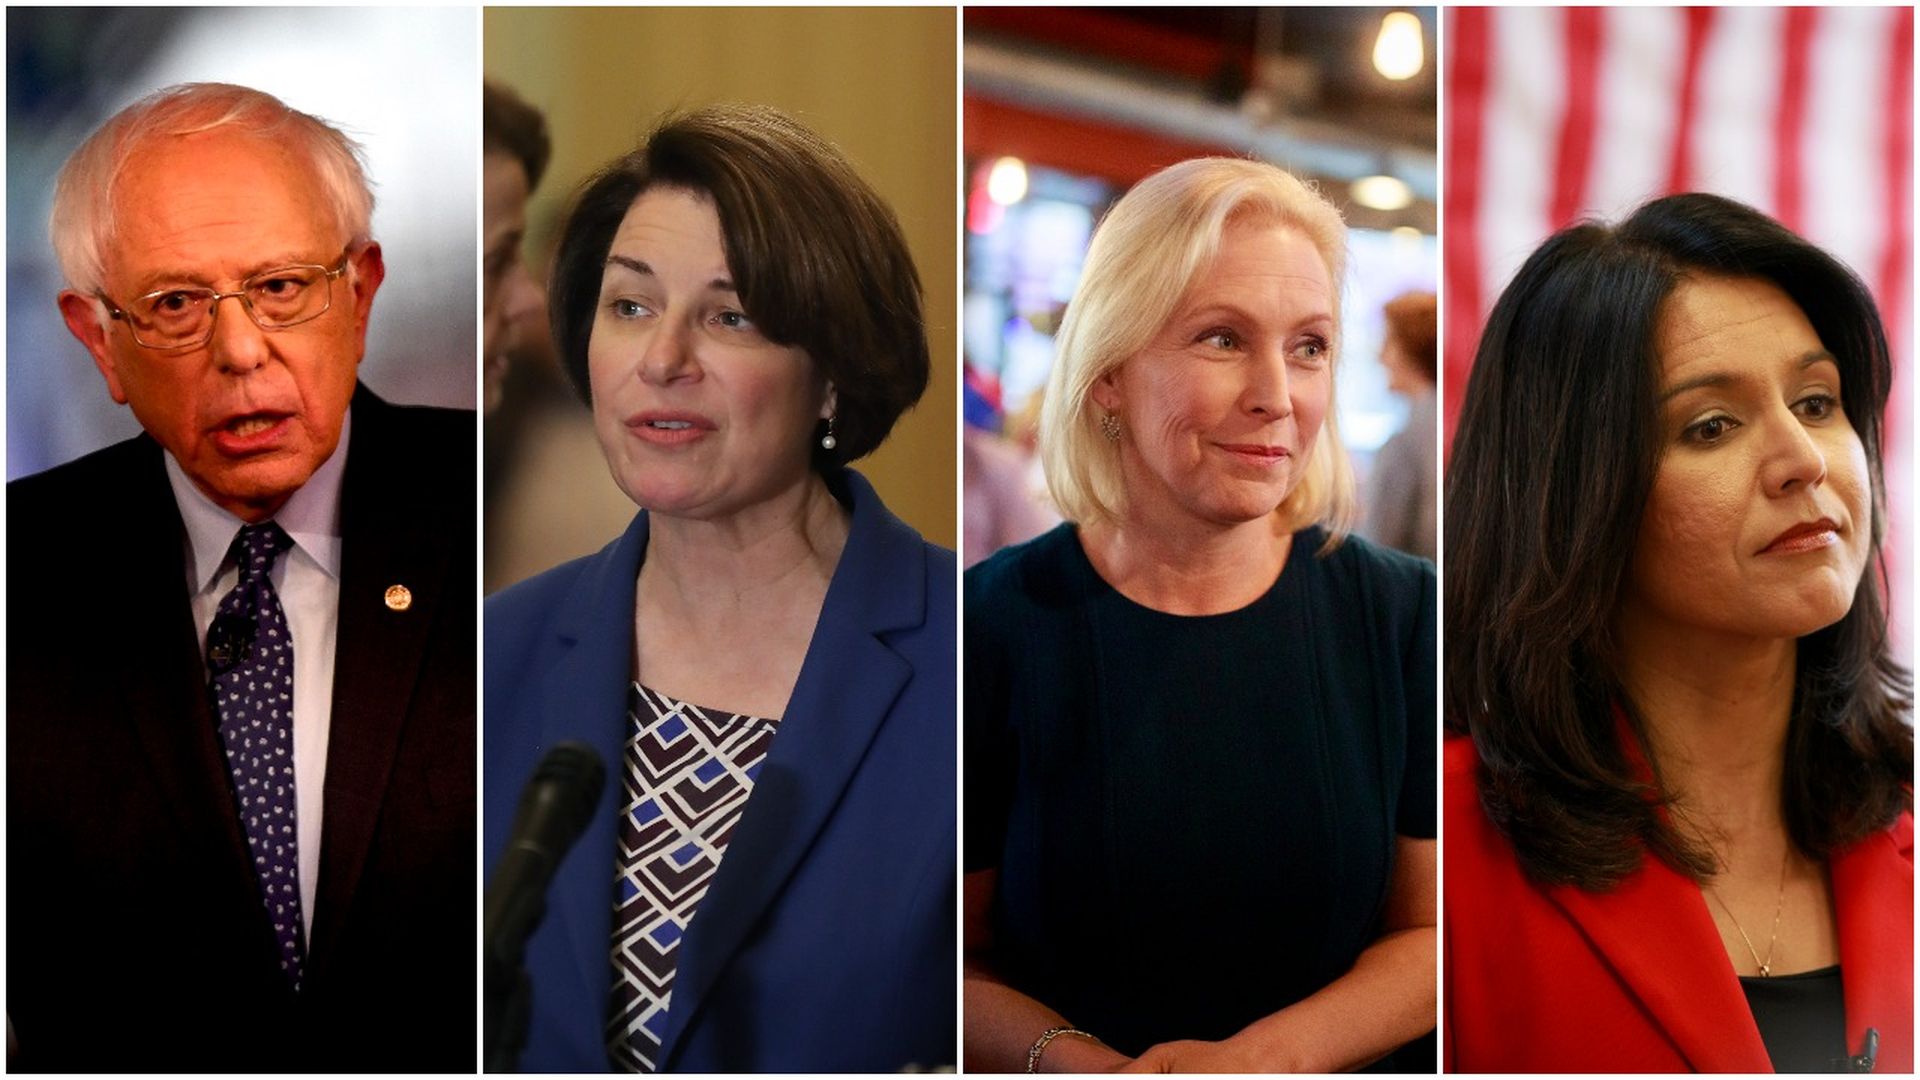 This image is a four-way split screen of the following candidates from left to right: Bernie Sanders, Amy Klobuchar, Kirsten Gillibrand, and Tulsi Gabbard.